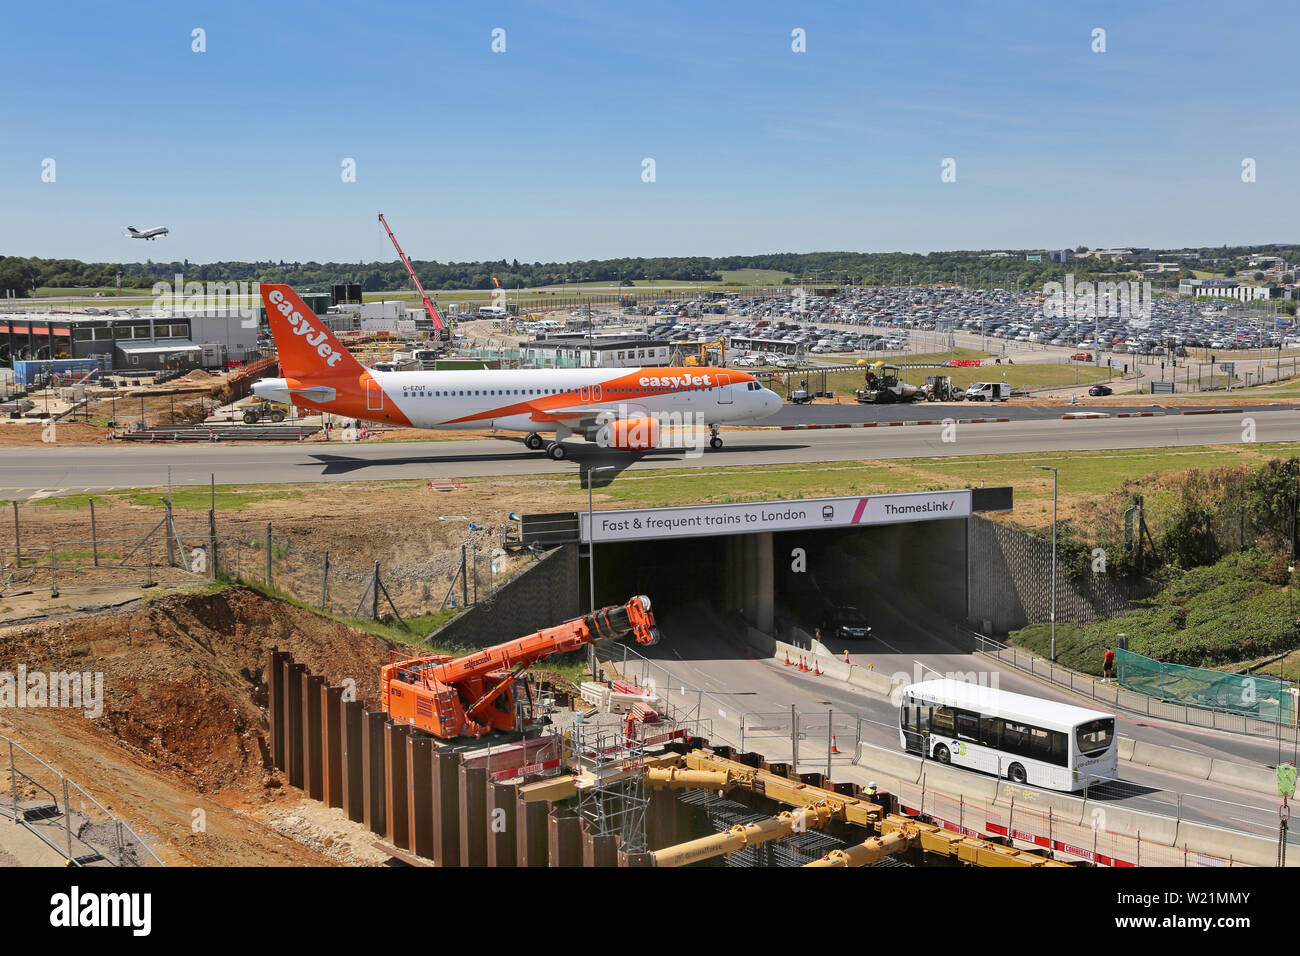 London Luton Airport, UK. Main access road running beneath airport taxiway with Easyjet plane passing. Excavation for new DART rail link in foreground Stock Photo